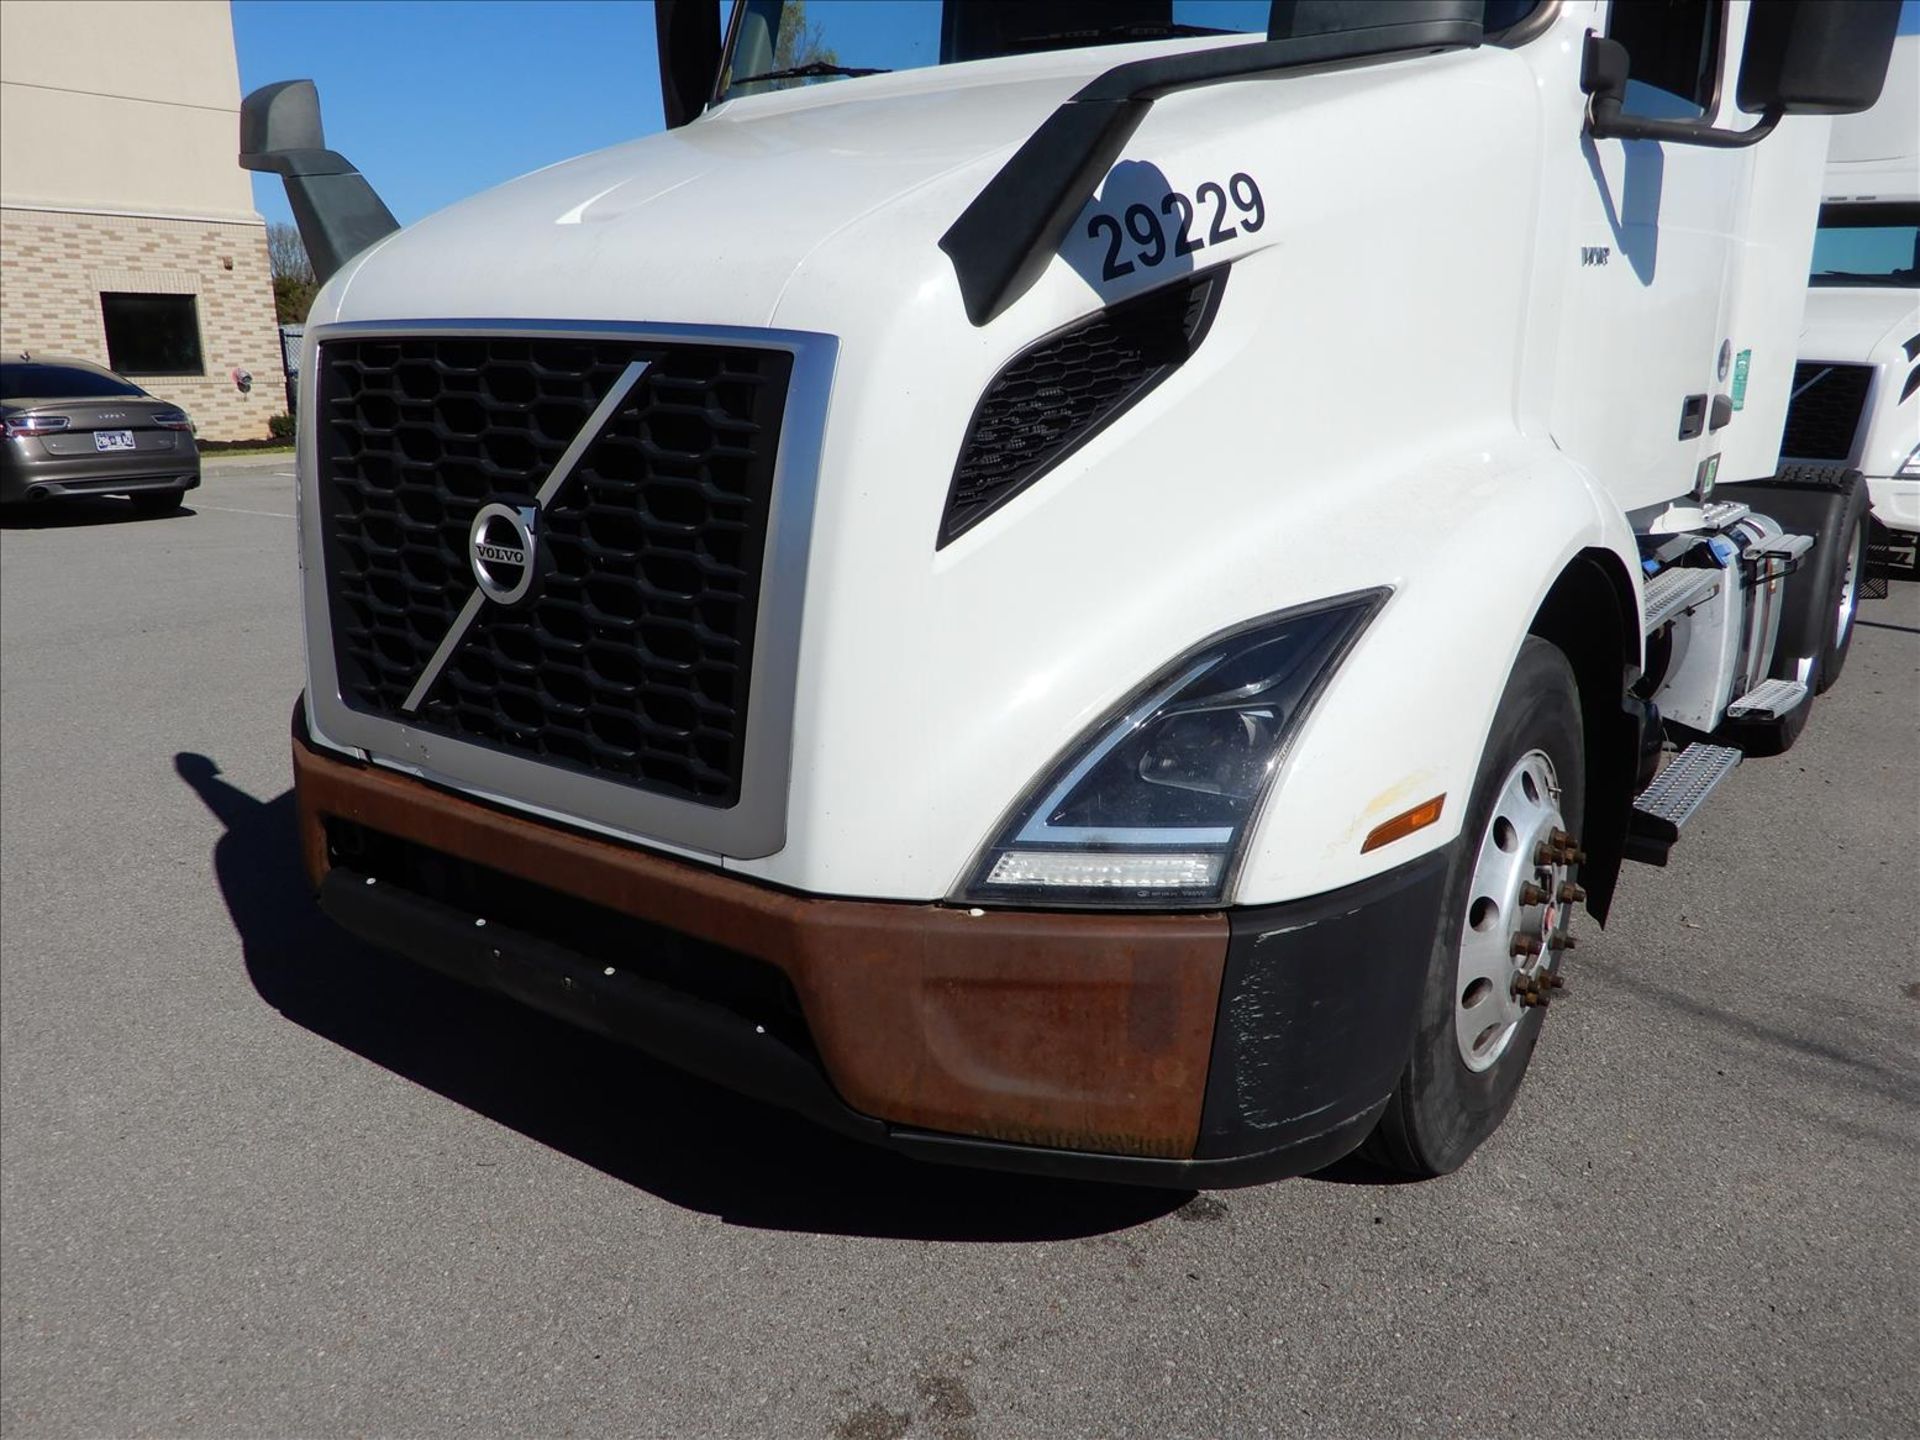 2019 Volvo VNR 300 Daycab Truck Tractor - Located in Murfreesboro, TN - Image 26 of 58